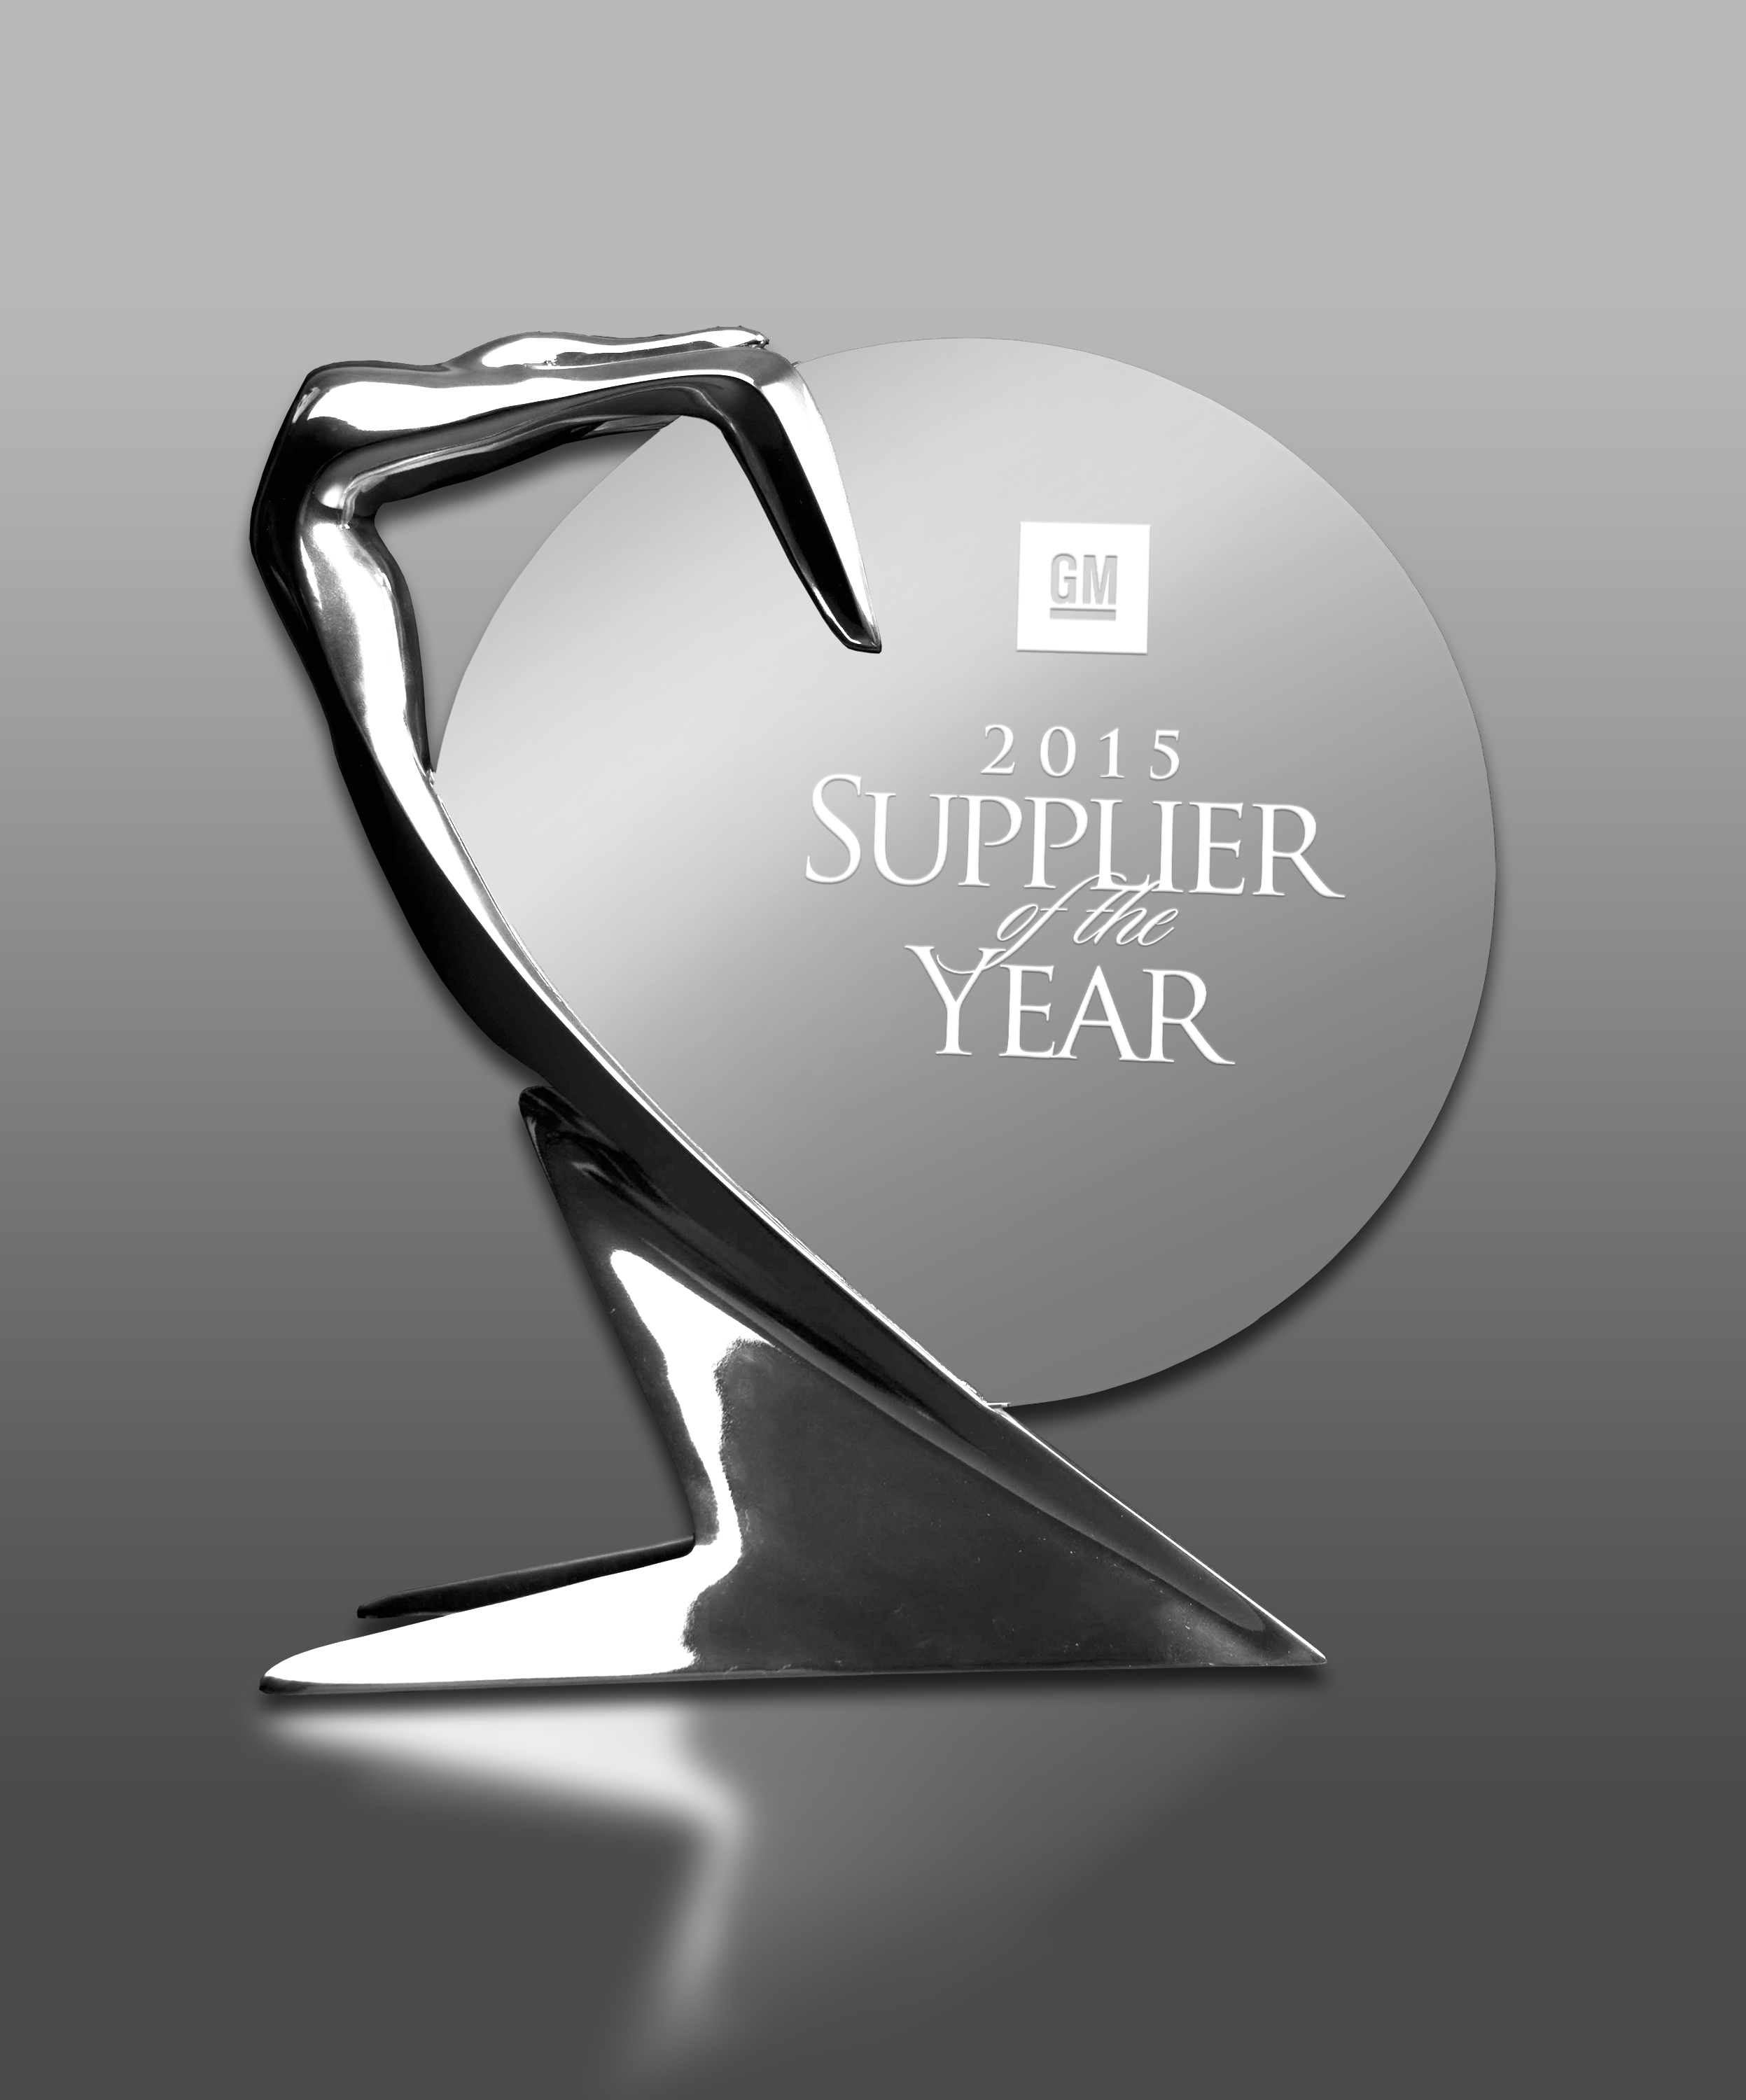 ChemicoMays received its seventh consecutive Supplier of the Year award from General Motors on March 10, 2016